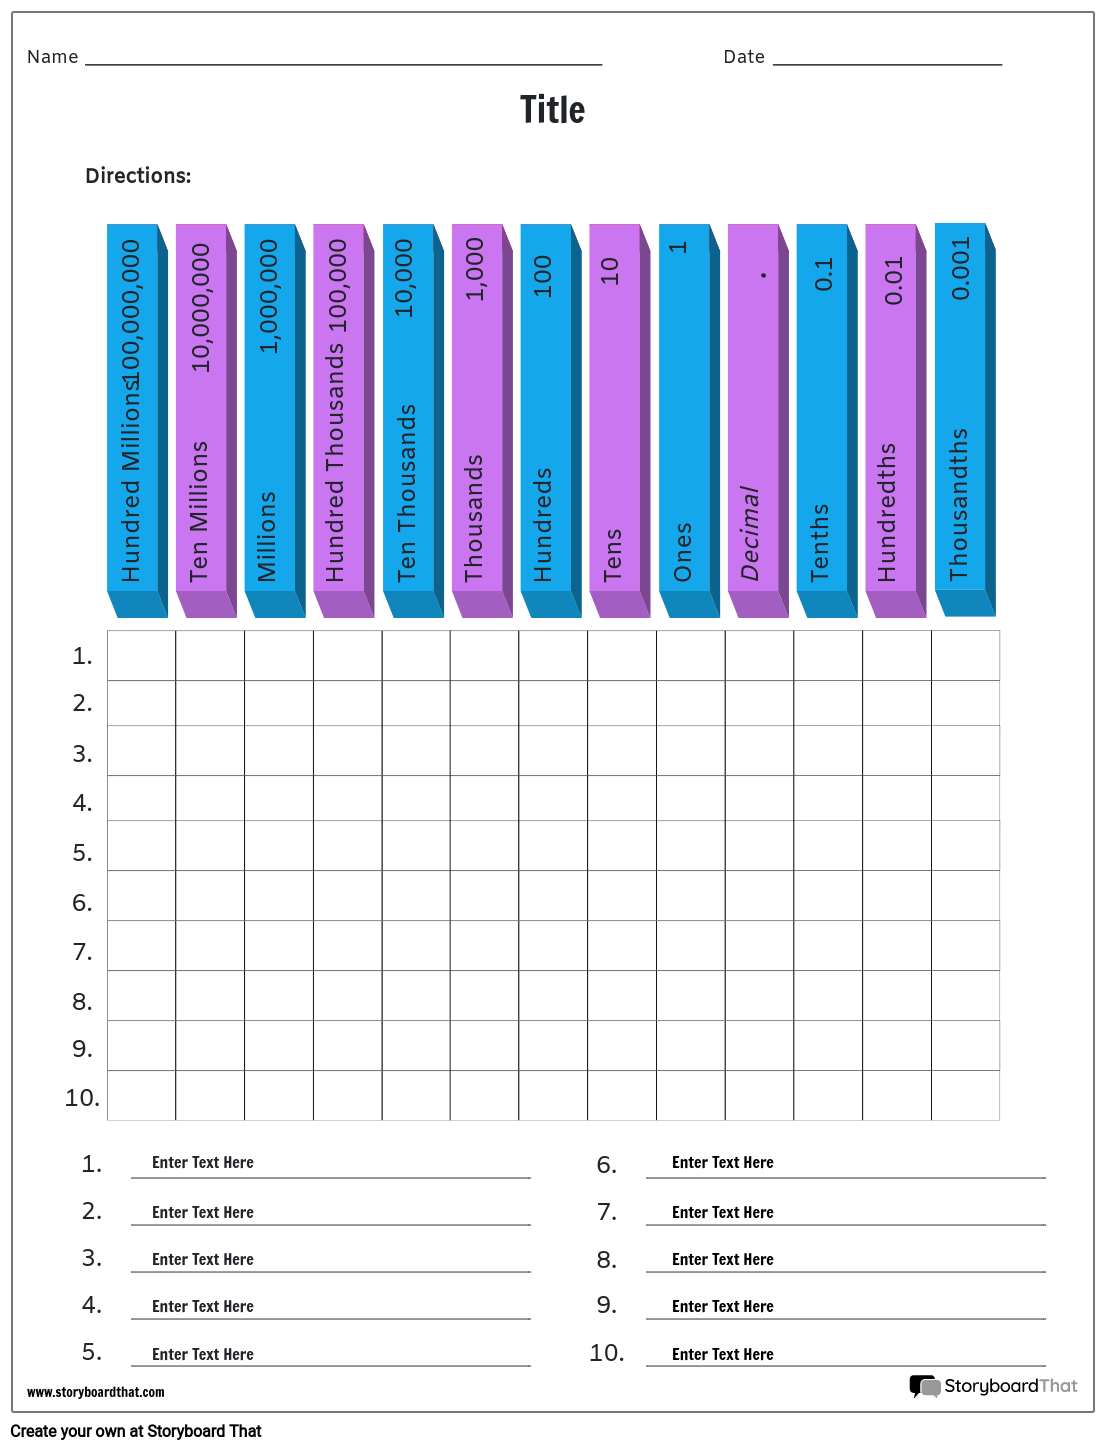 pv-3-storyboard-by-worksheet-templates